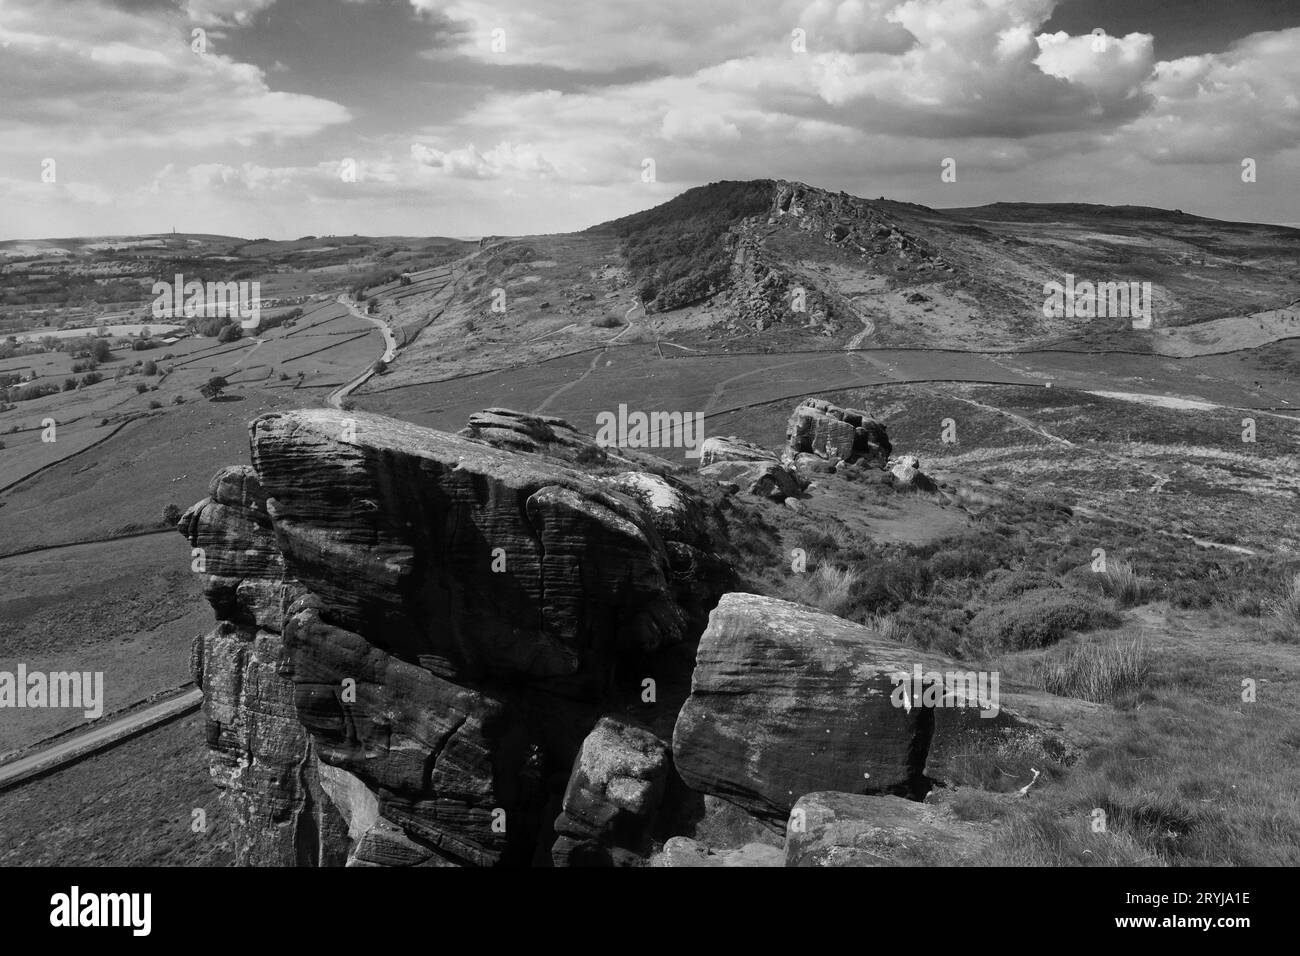 View to Hen Cloud rock, the Roaches Rocks, Upper Hulme, Staffordshire, England, UK Stock Photo